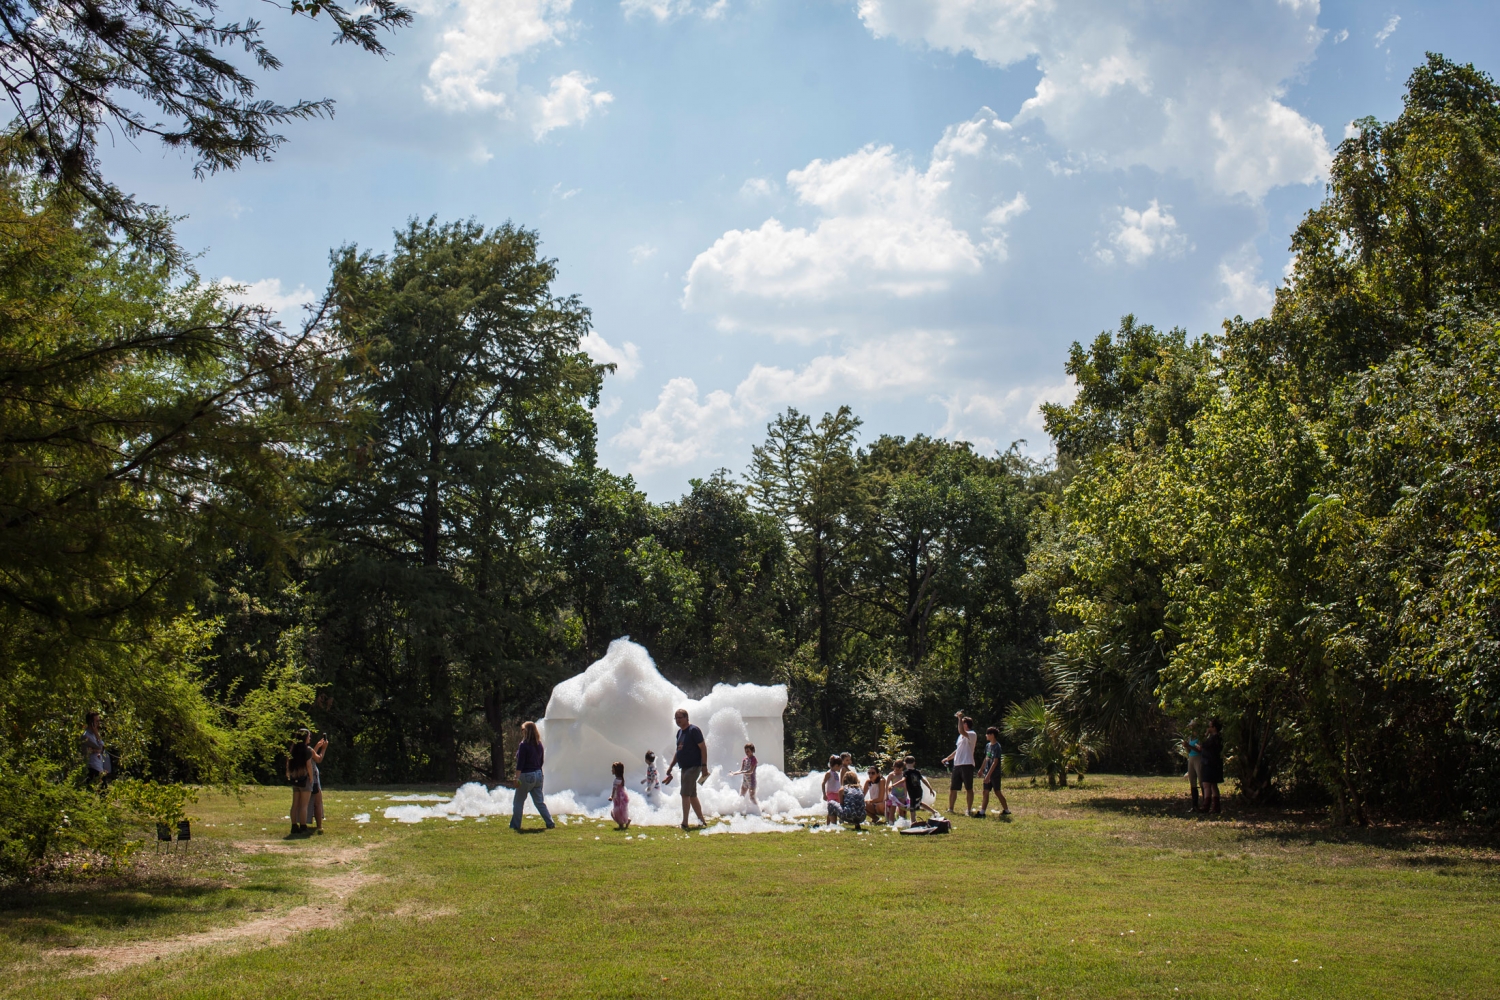 Roger Hiorns
A retrospective view of the pathway, 2008 &amp;ndash; ongoing
Foam, compressor, and polyester tanks
Dimensions variable
Installation view,&amp;nbsp;Strange Pilgrims, The Contemporary Austin &amp;ndash; Betty and Edward Sculpture Park at Laguna Gloria, 2015
Image &amp;copy; The Contemporary Austin. Courtesy The Contemporary Austin. Photo:&amp;nbsp;Brian Fitzsimmons